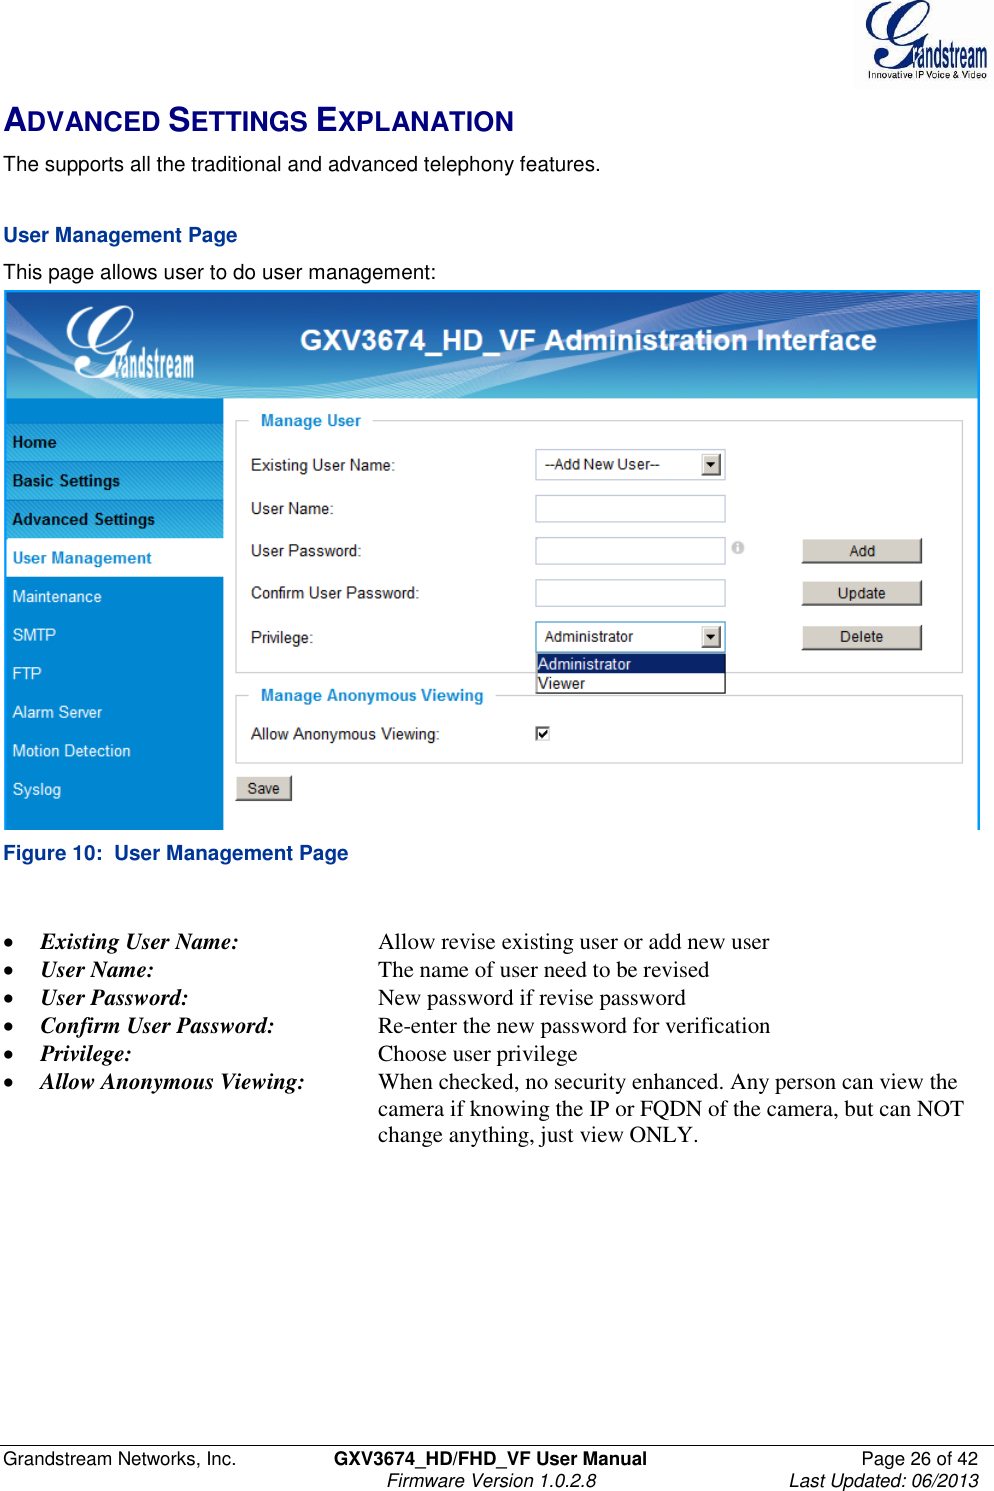  Grandstream Networks, Inc.  GXV3674_HD/FHD_VF User Manual  Page 26 of 42   Firmware Version 1.0.2.8  Last Updated: 06/2013  ADVANCED SETTINGS EXPLANATION The supports all the traditional and advanced telephony features.     User Management Page This page allows user to do user management:  Figure 10:  User Management Page   Existing User Name:    Allow revise existing user or add new user  User Name:      The name of user need to be revised  User Password:      New password if revise password  Confirm User Password:    Re-enter the new password for verification  Privilege:        Choose user privilege  Allow Anonymous Viewing:  When checked, no security enhanced. Any person can view the            camera if knowing the IP or FQDN of the camera, but can NOT            change anything, just view ONLY.   